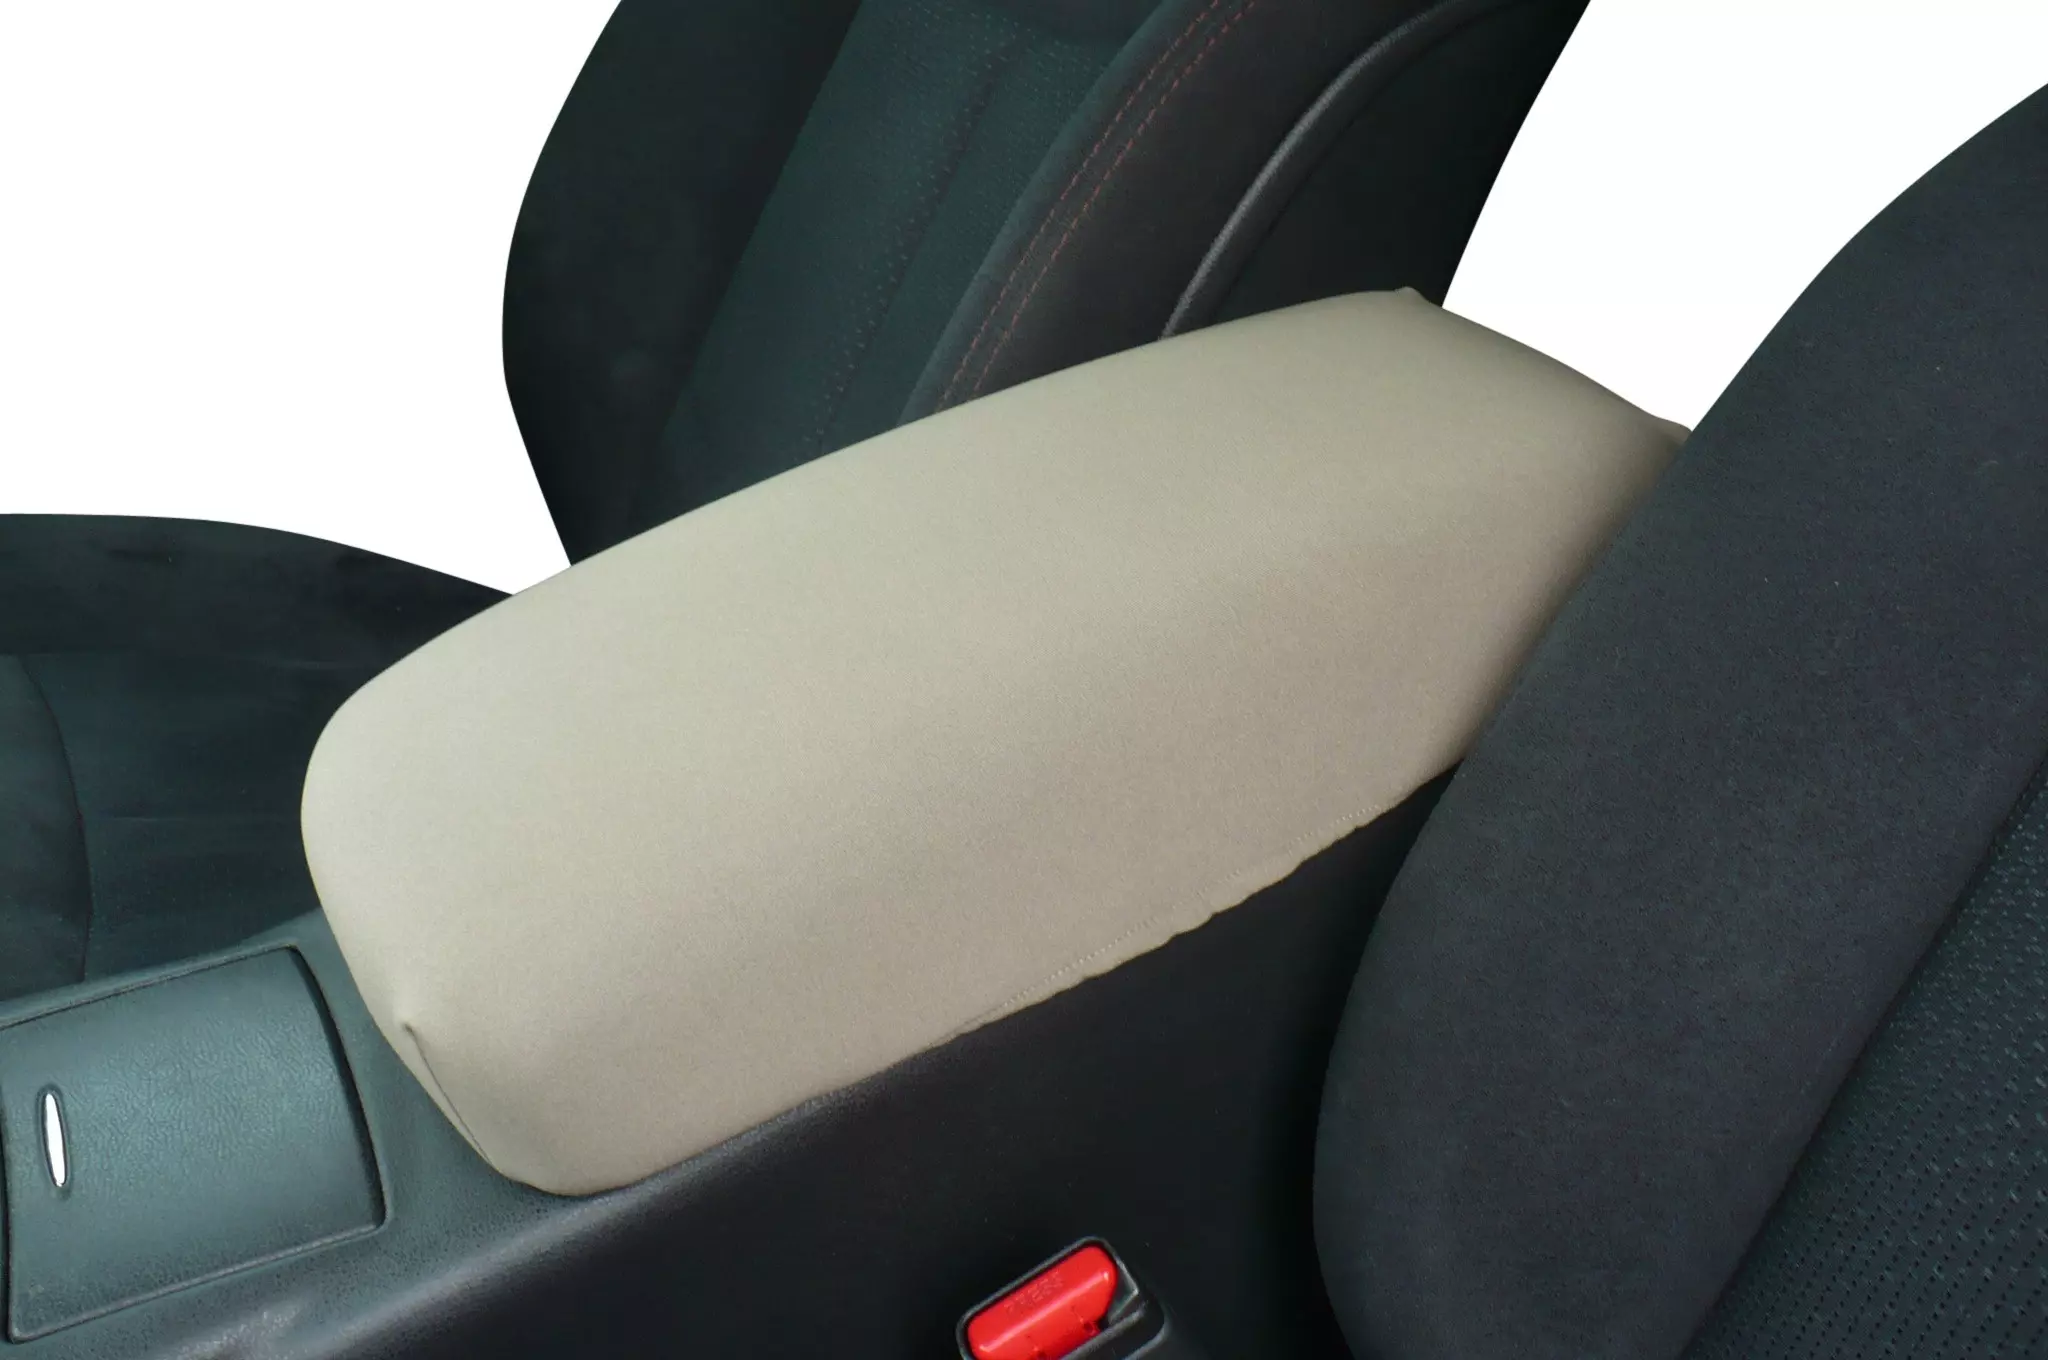 Neoprene Console Cover - Nissan Leaf 2010-17